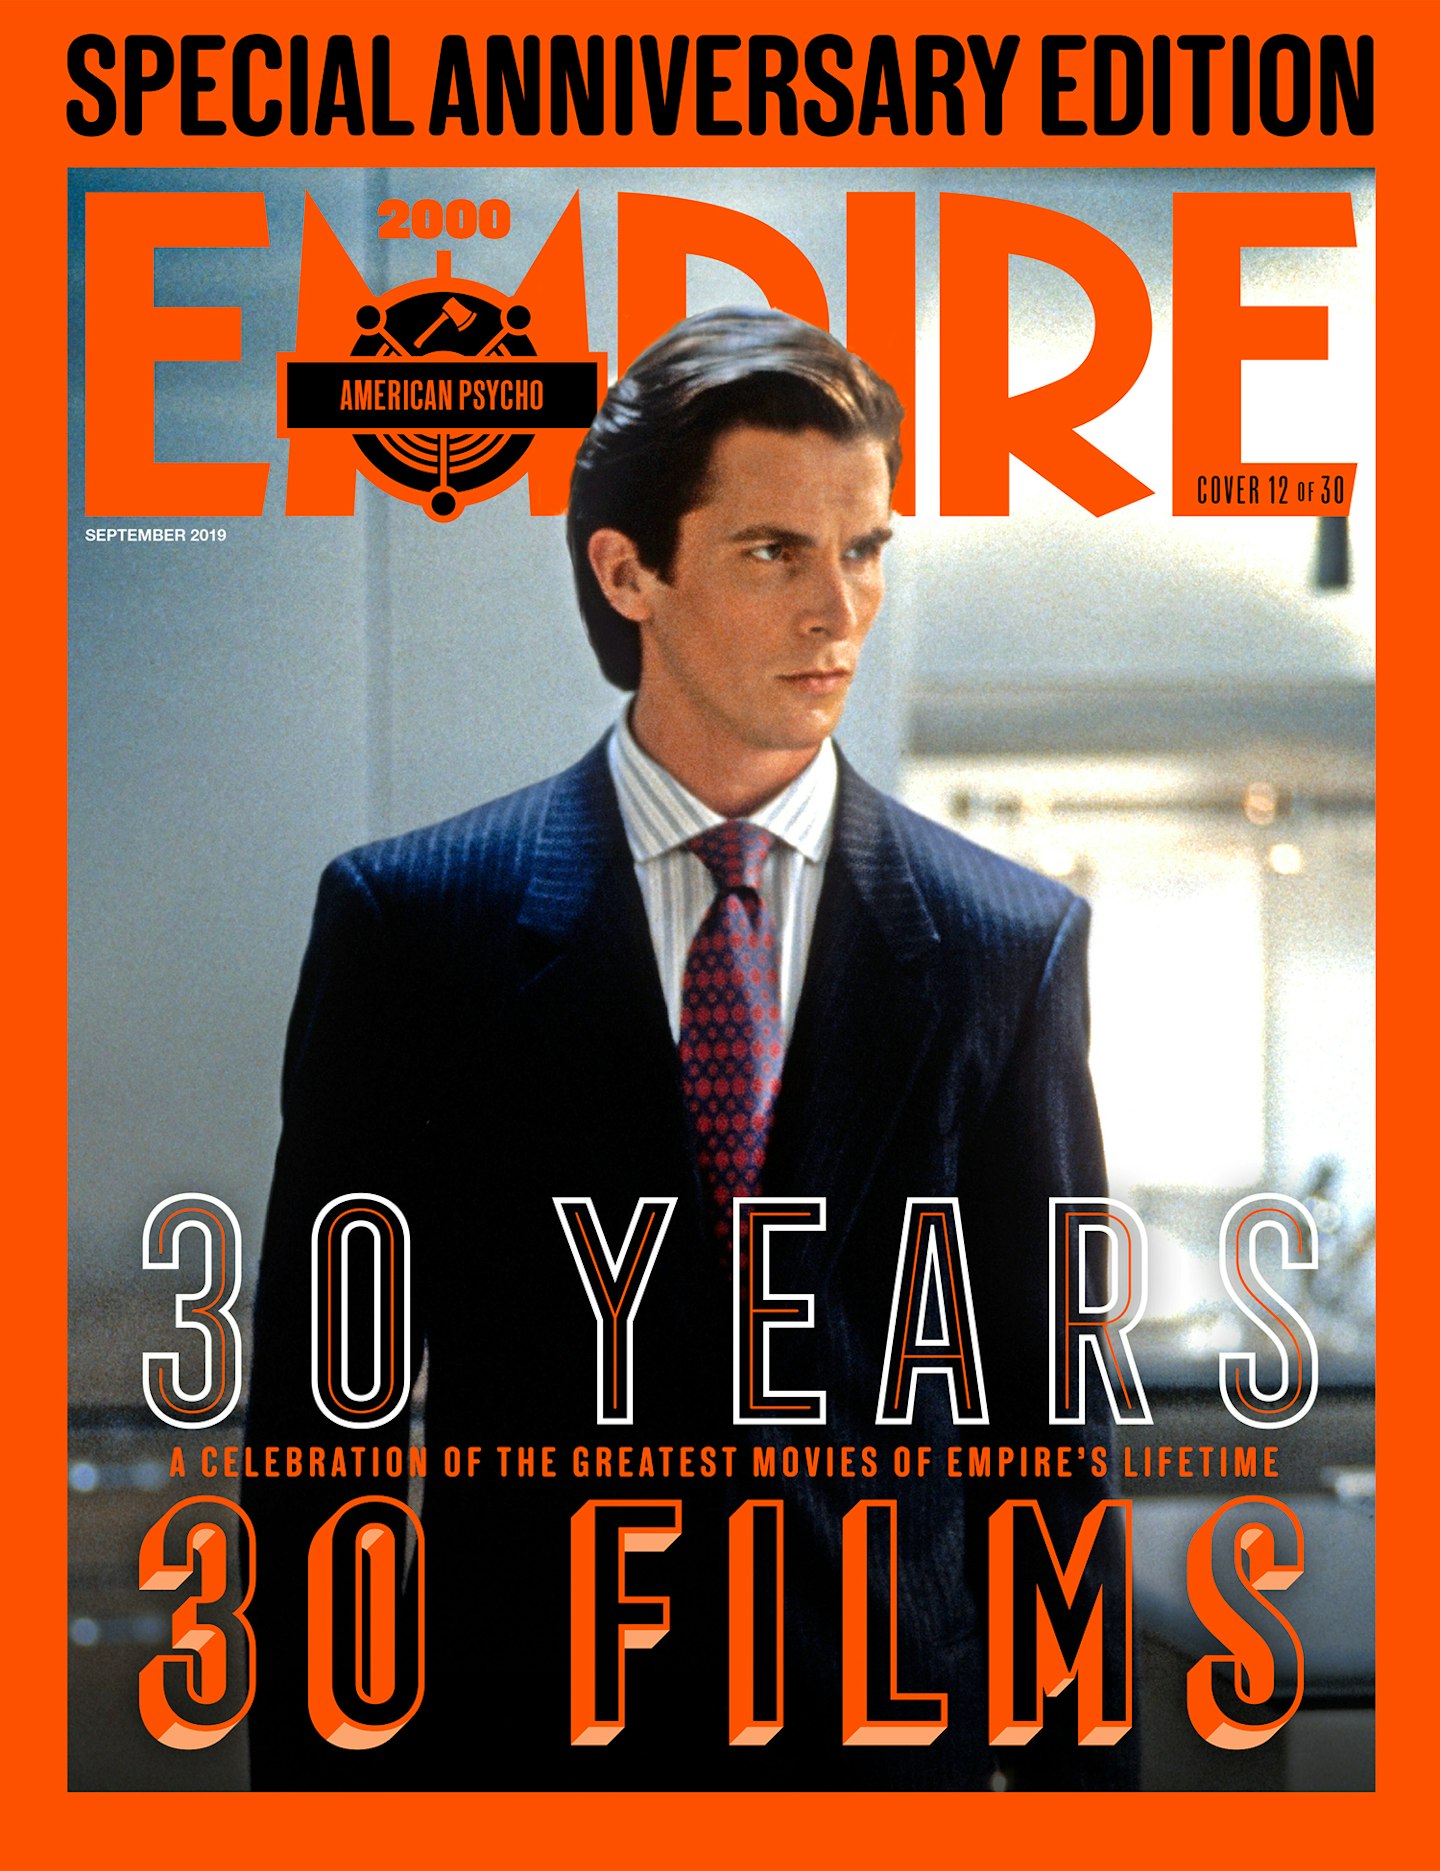 Empire's 30th Anniversary Edition Covers – American Psycho